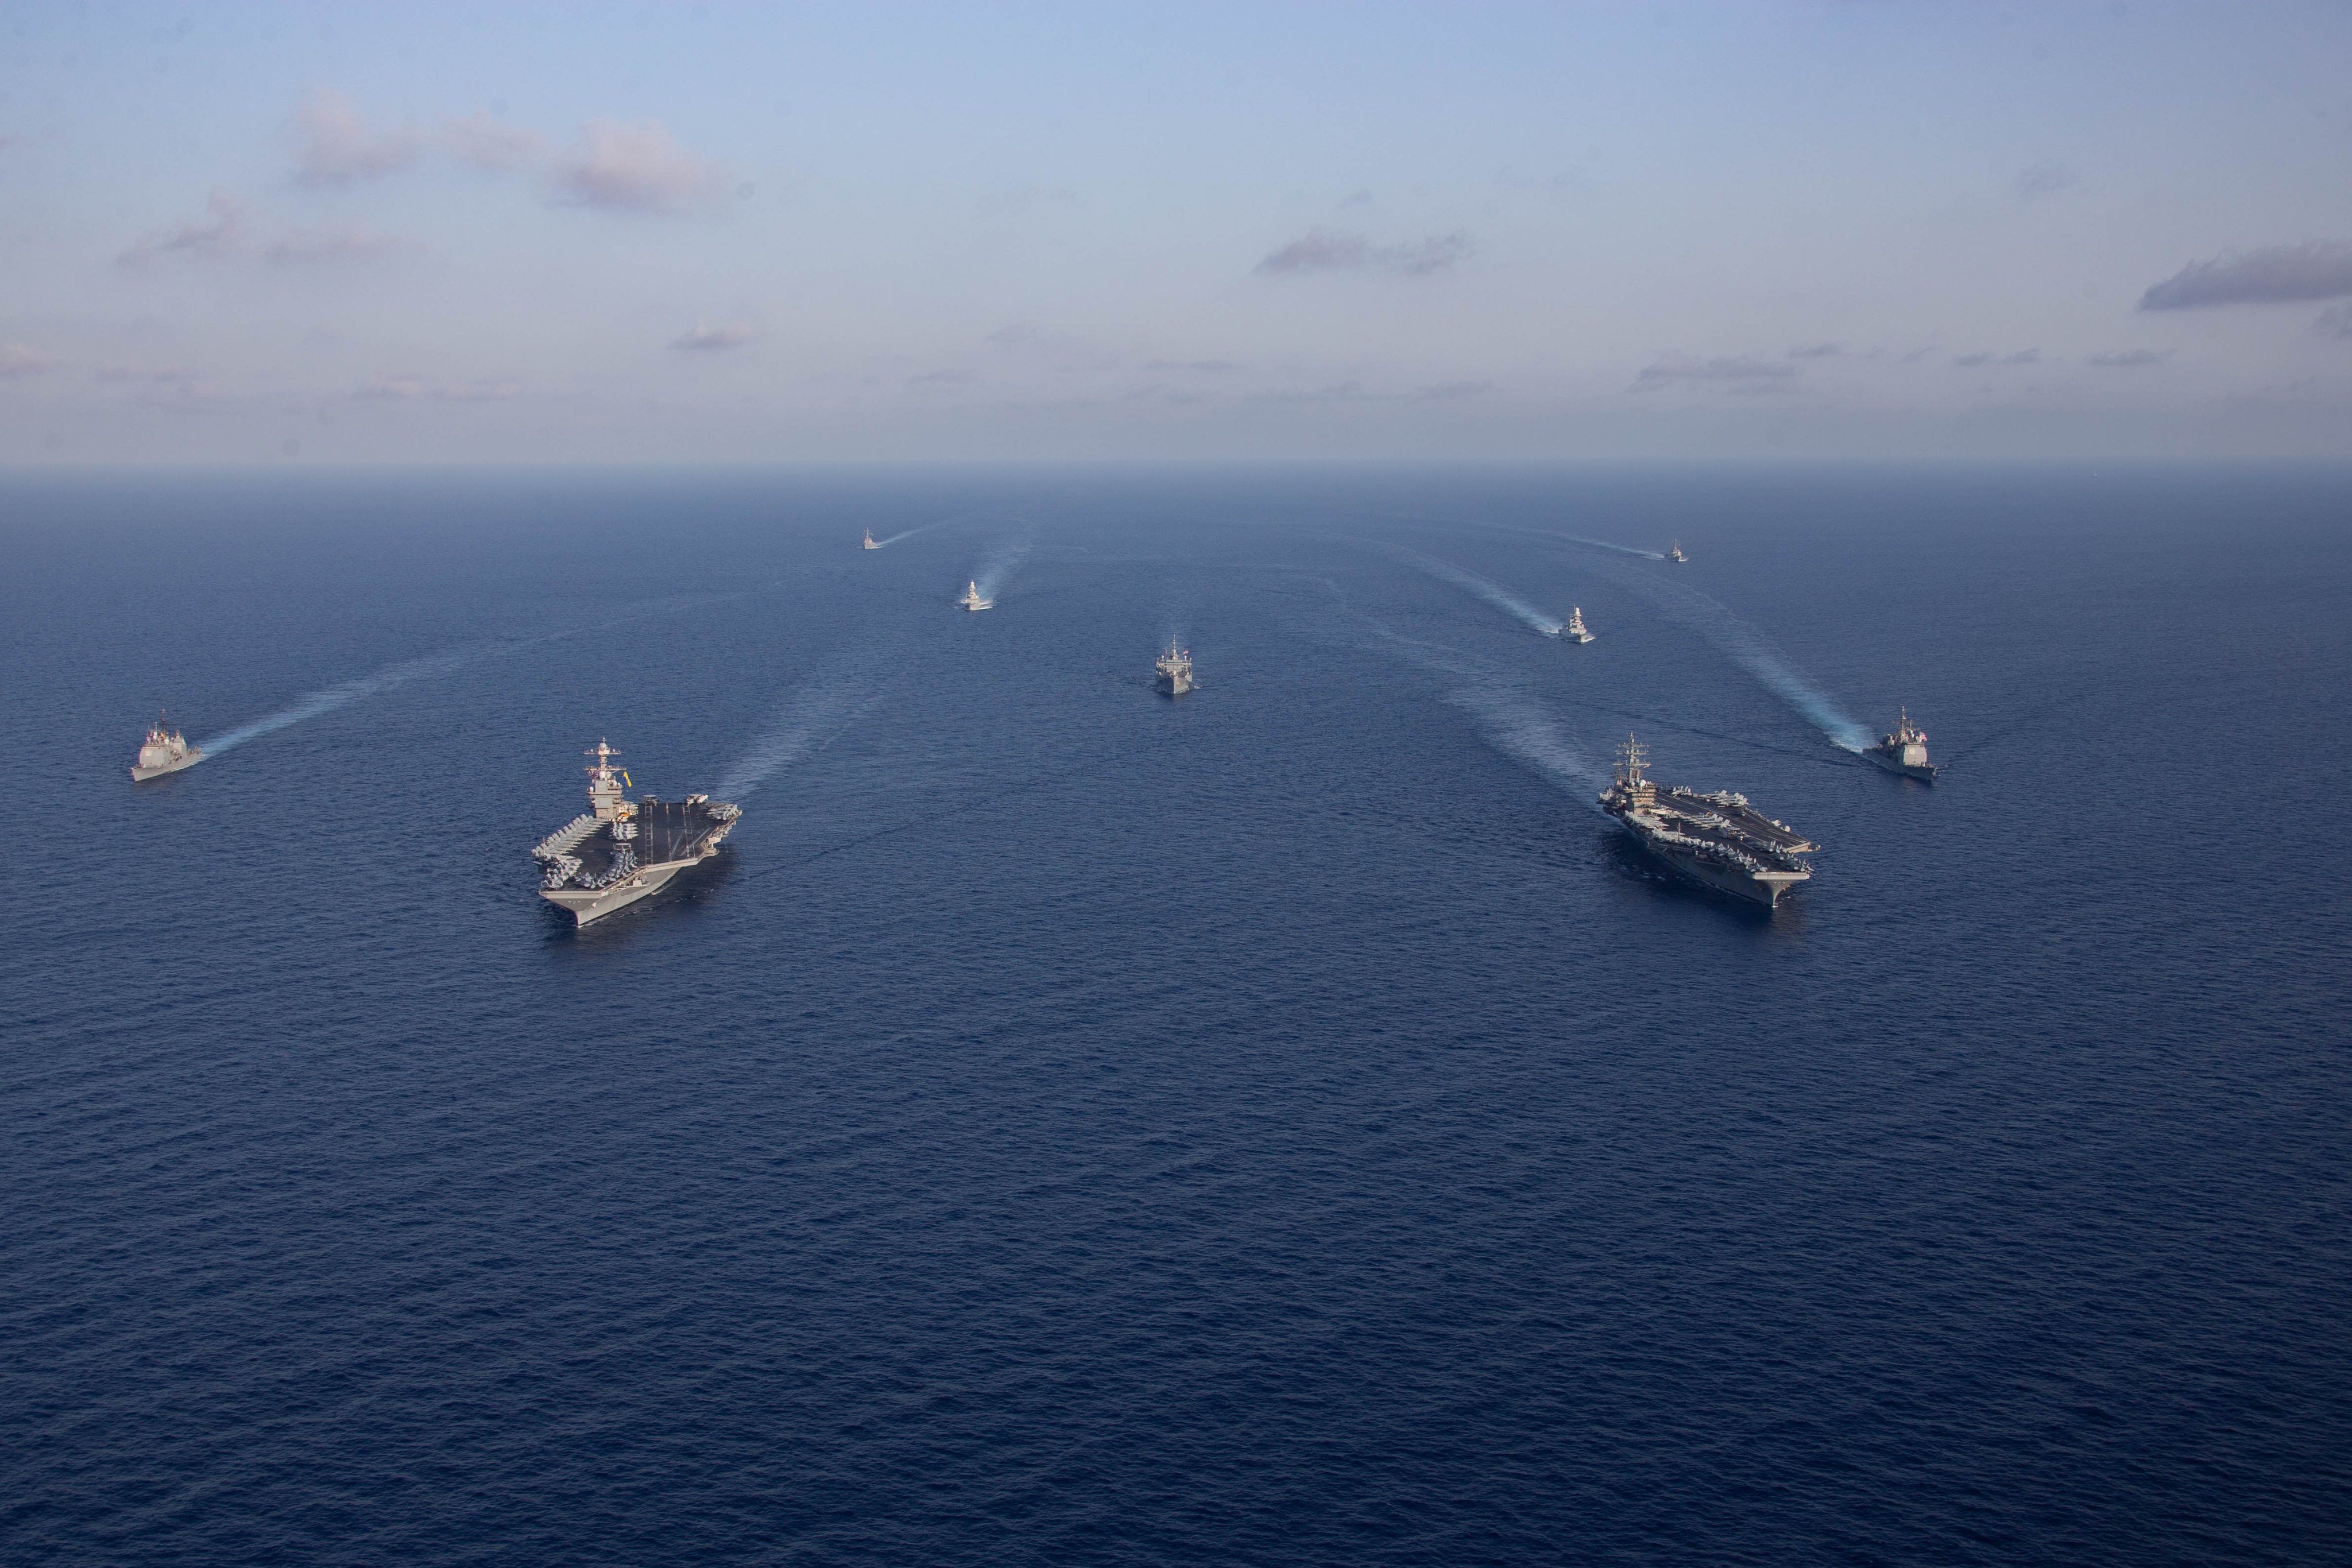 Ships from the Gerald R. Ford and Dwight D. Eisenhower Carrier Strike Groups (CSG), U.S. Sixth Fleet command ship USS Mount Whitney (LCC 20), and Italian Navy frigates Carlo Margottini (F 592) and Virginio Fasan (F 591) sail in formation in the Mediterranean Sea, Nov. 3, 2023. The two carrier strike groups are operating in the area at the direction of the Secretary of Defense to bolster deterrence in the region. (U.S. Navy photo by Mass Communication Specialist 2nd Class Jacob Mattingly)